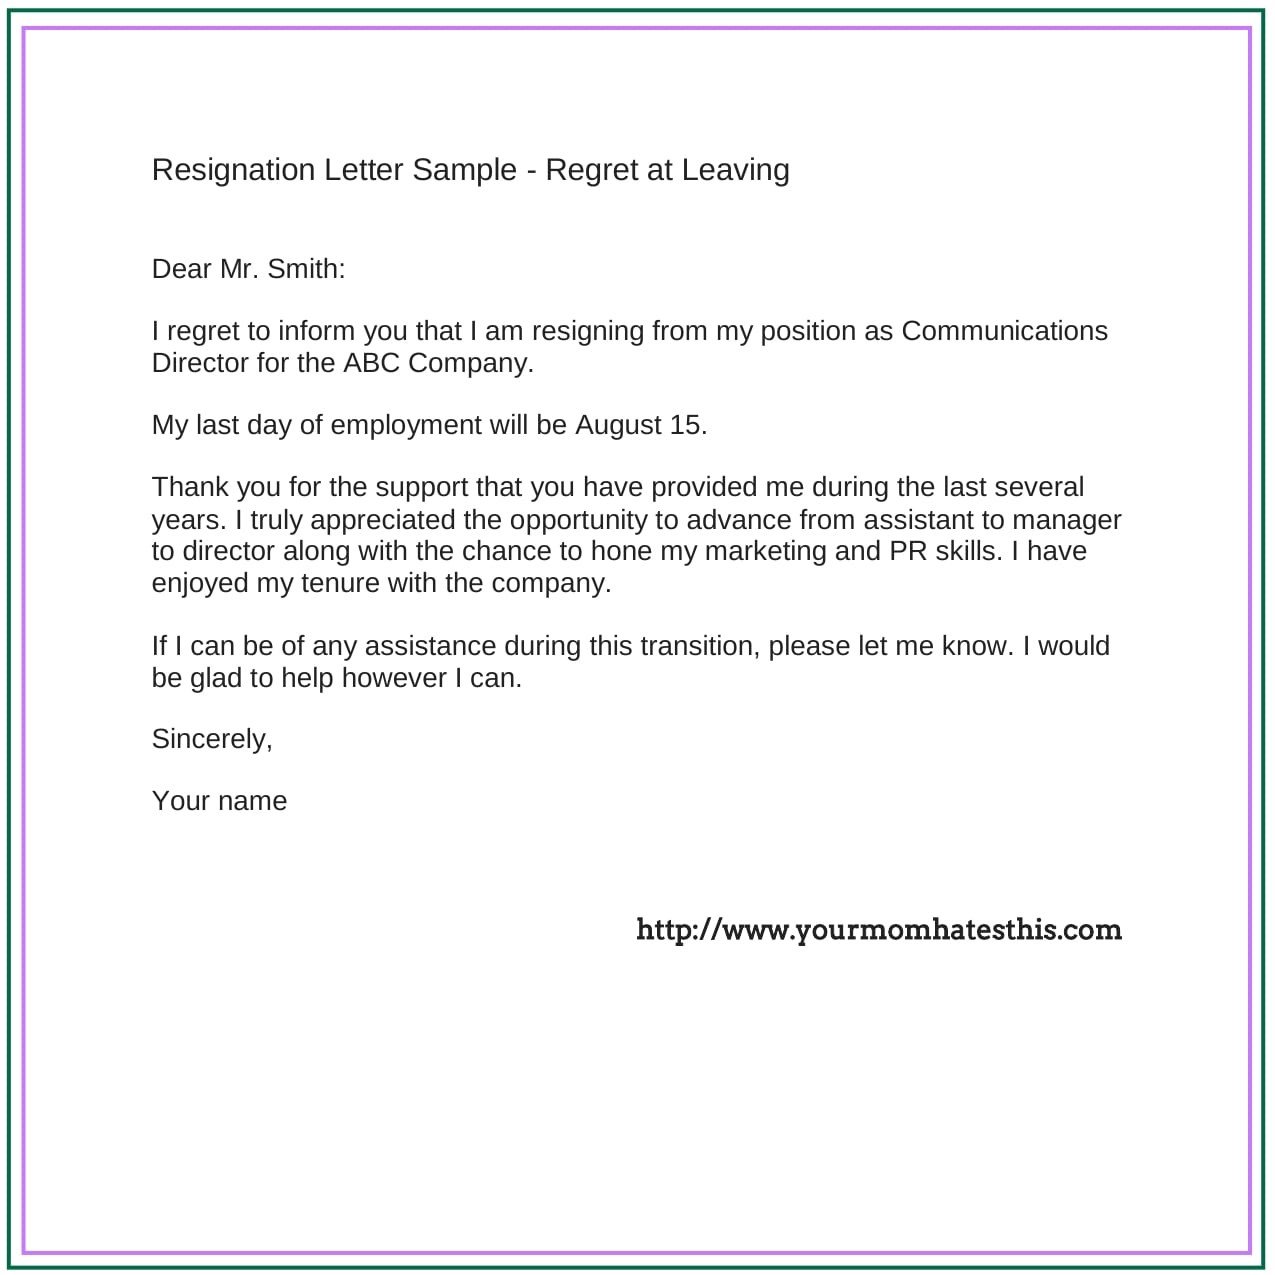 Resignation Letter with Regret Dos and Don’ts for A Resignation Letter